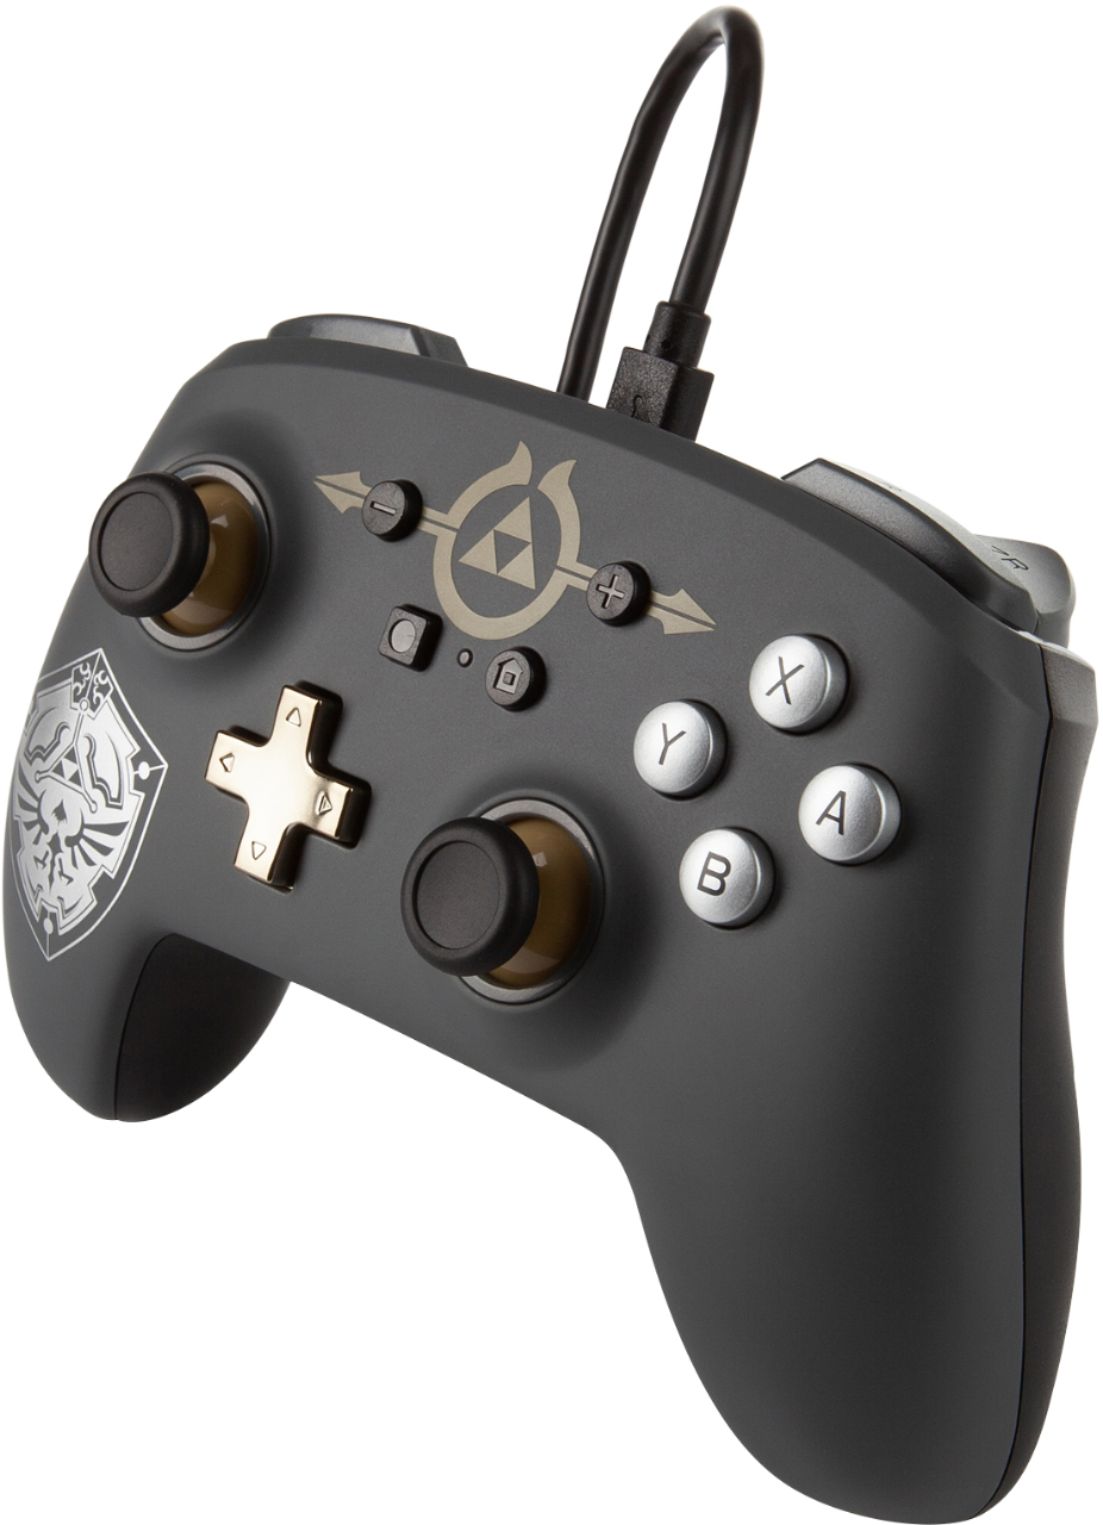  PowerA Enhanced Wired Controller for Nintendo Switch